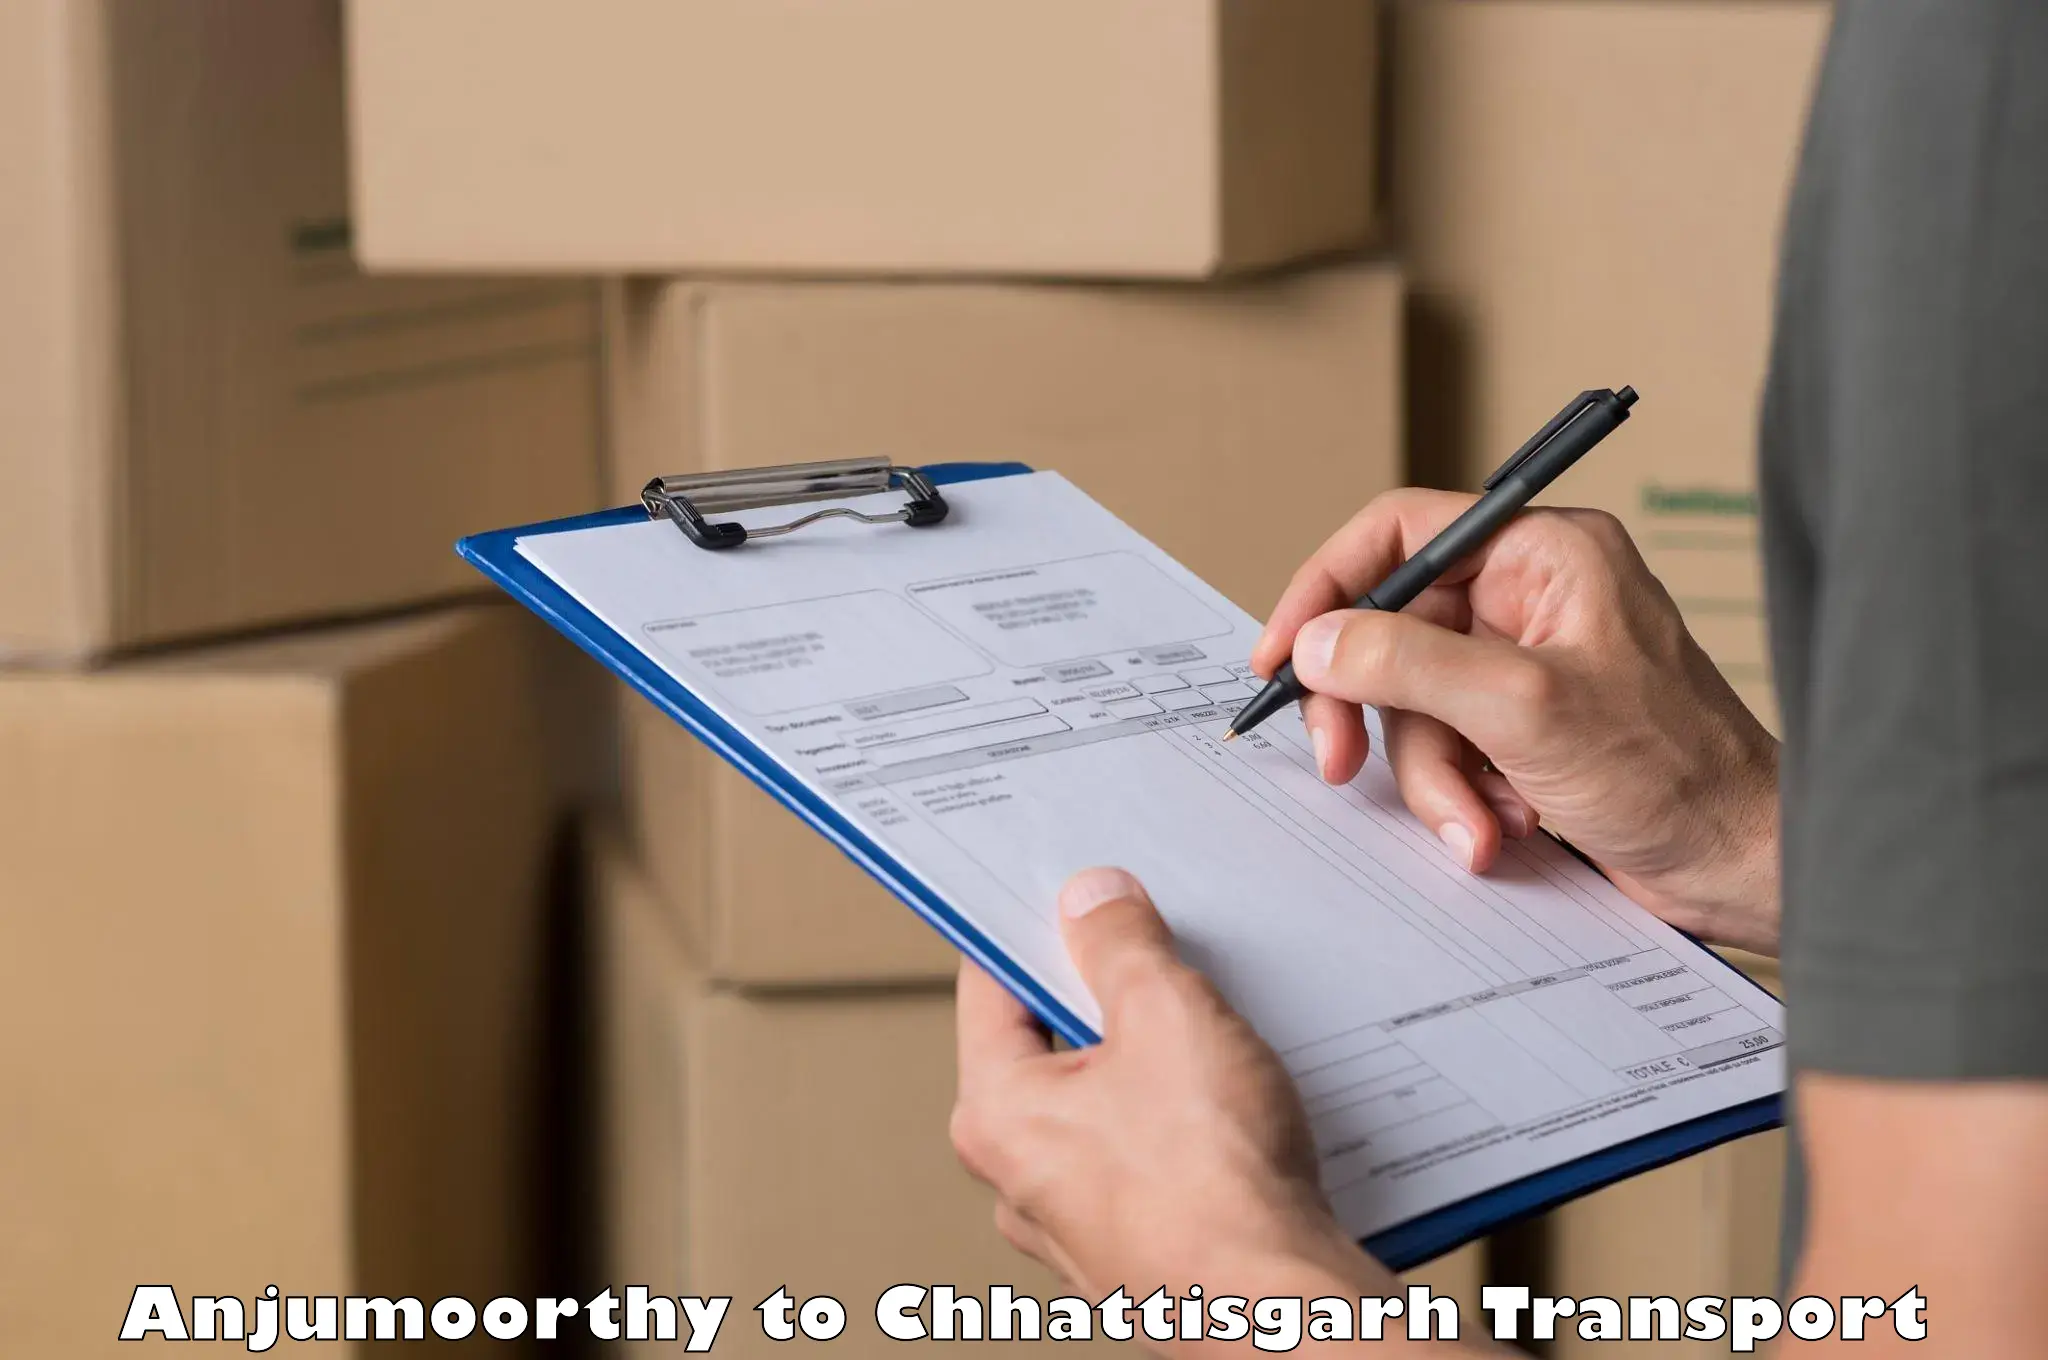 Road transport online services Anjumoorthy to Dongargarh